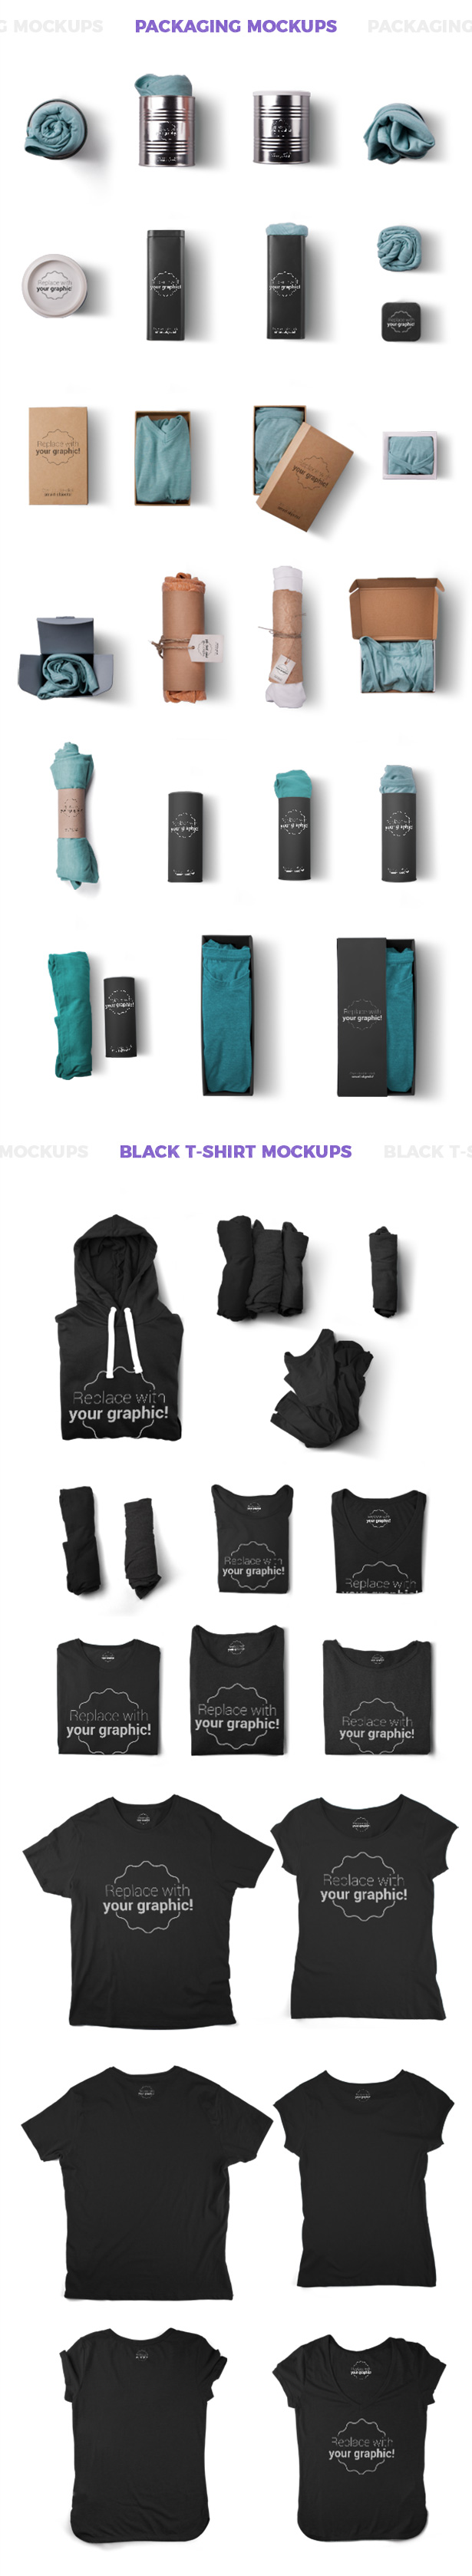 Download T-shirt Mockups and Packages - Hero Images Scene Generator by CreativeForm